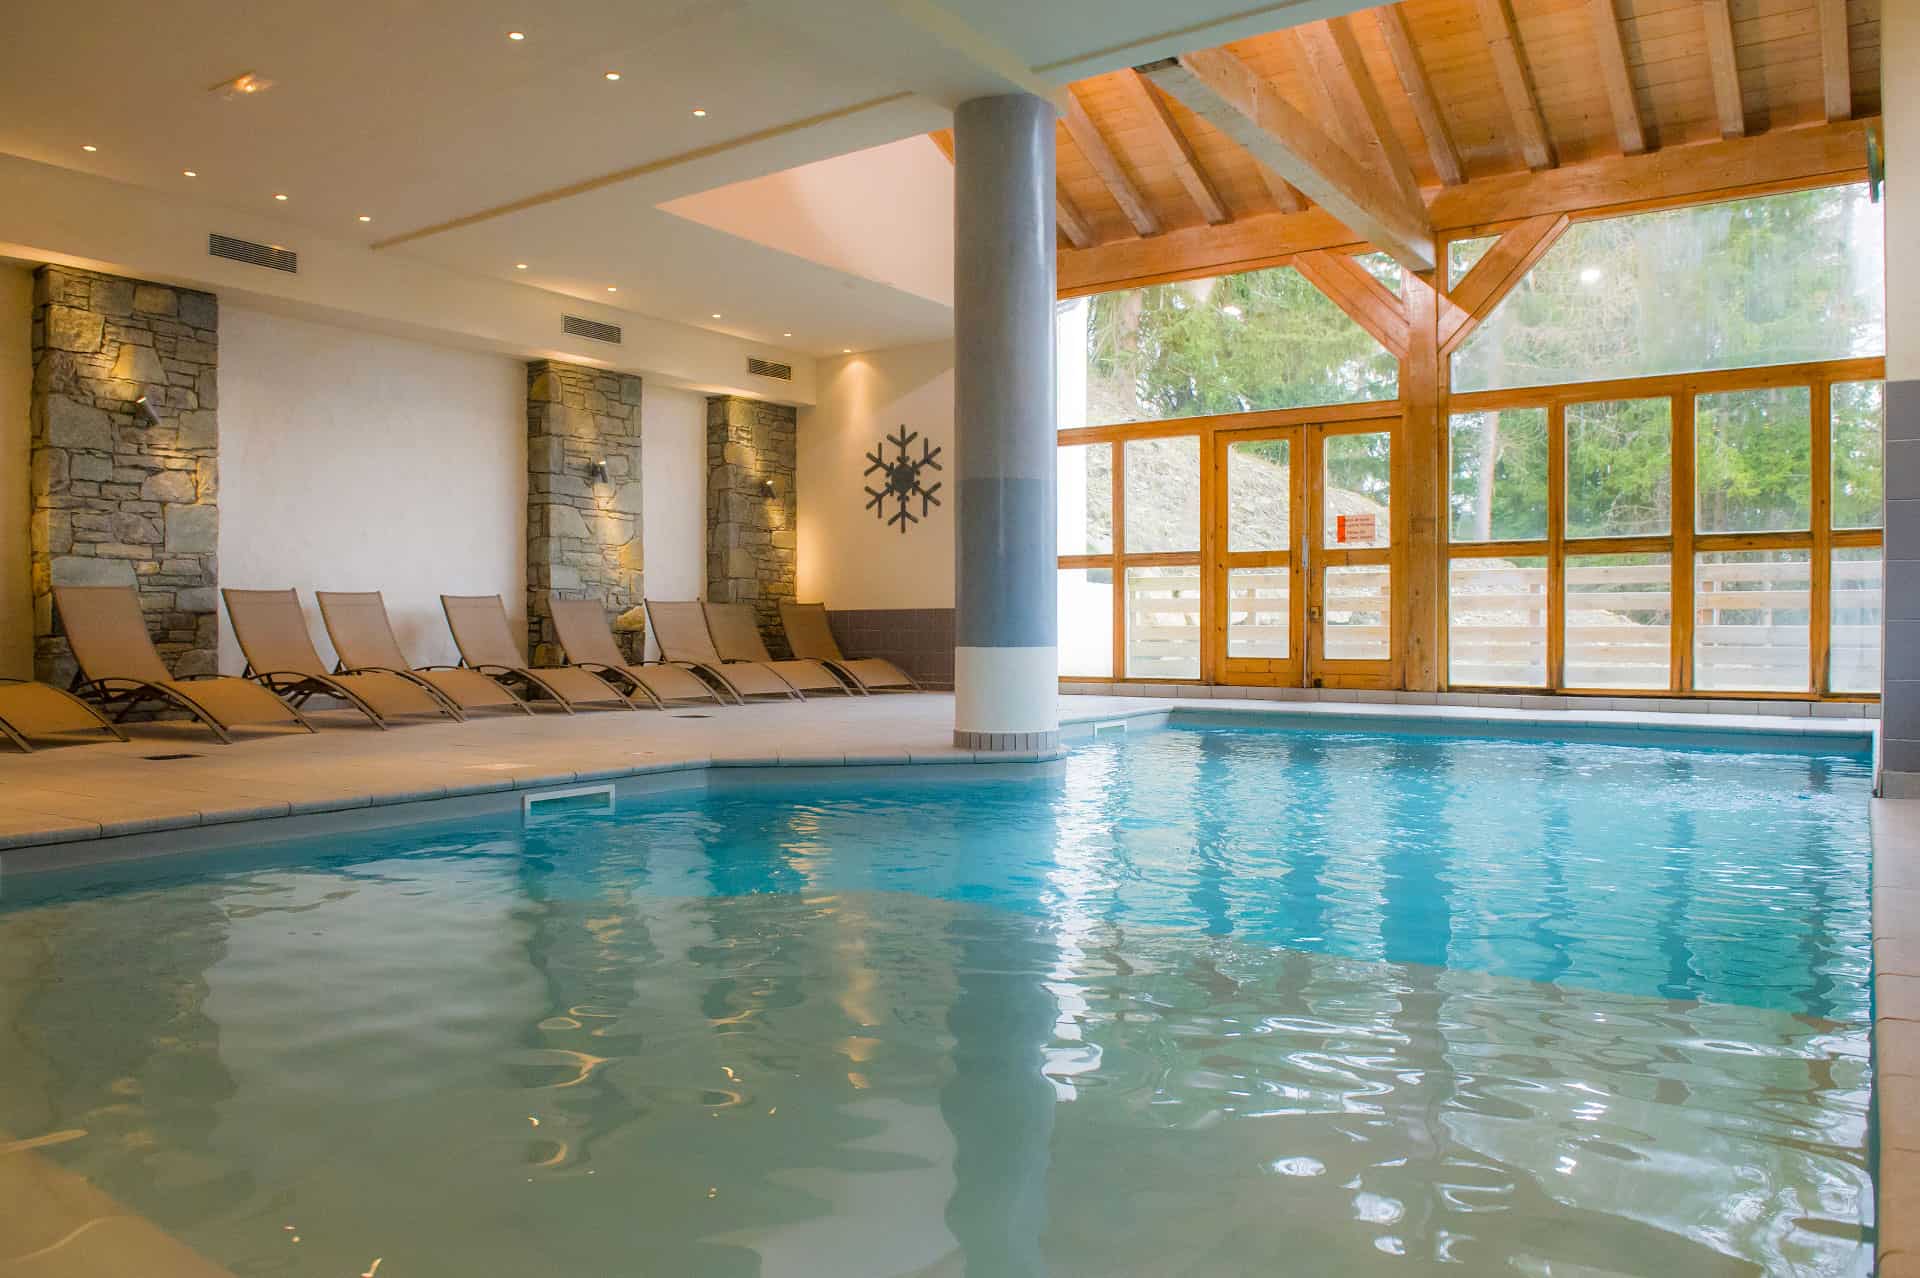 Indoor heated swimming pool in Les Chalets de Wengen holiday residence in Montchavin-la-Plagne, in the Northern Alps